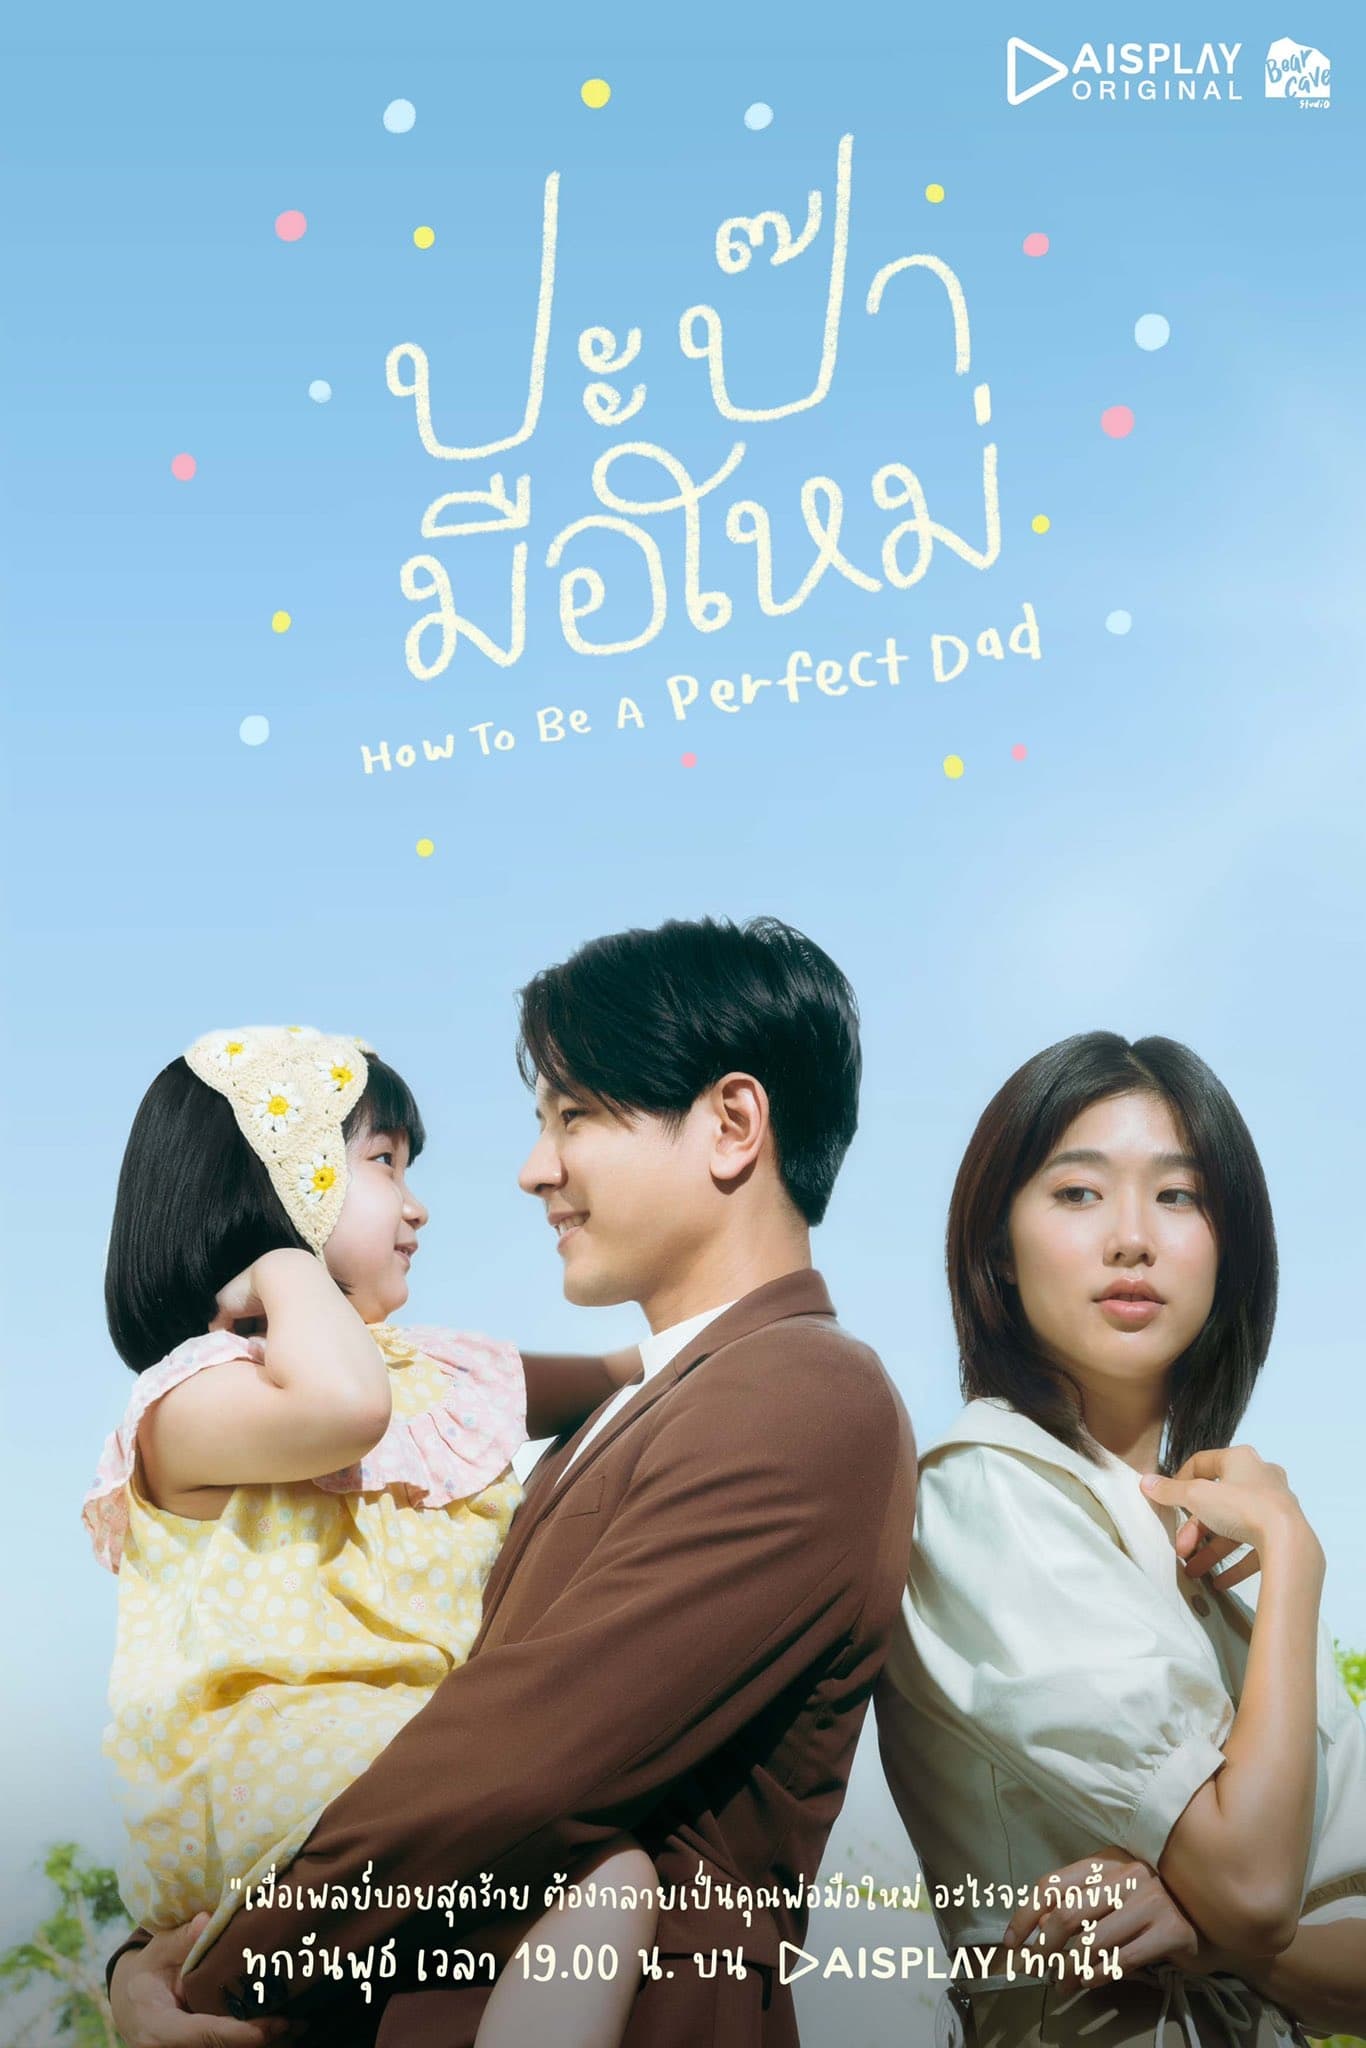 TV ratings for How To Be A Perfect Dad (ปะป๊ามือใหม่) in Chile. AIS Play TV series